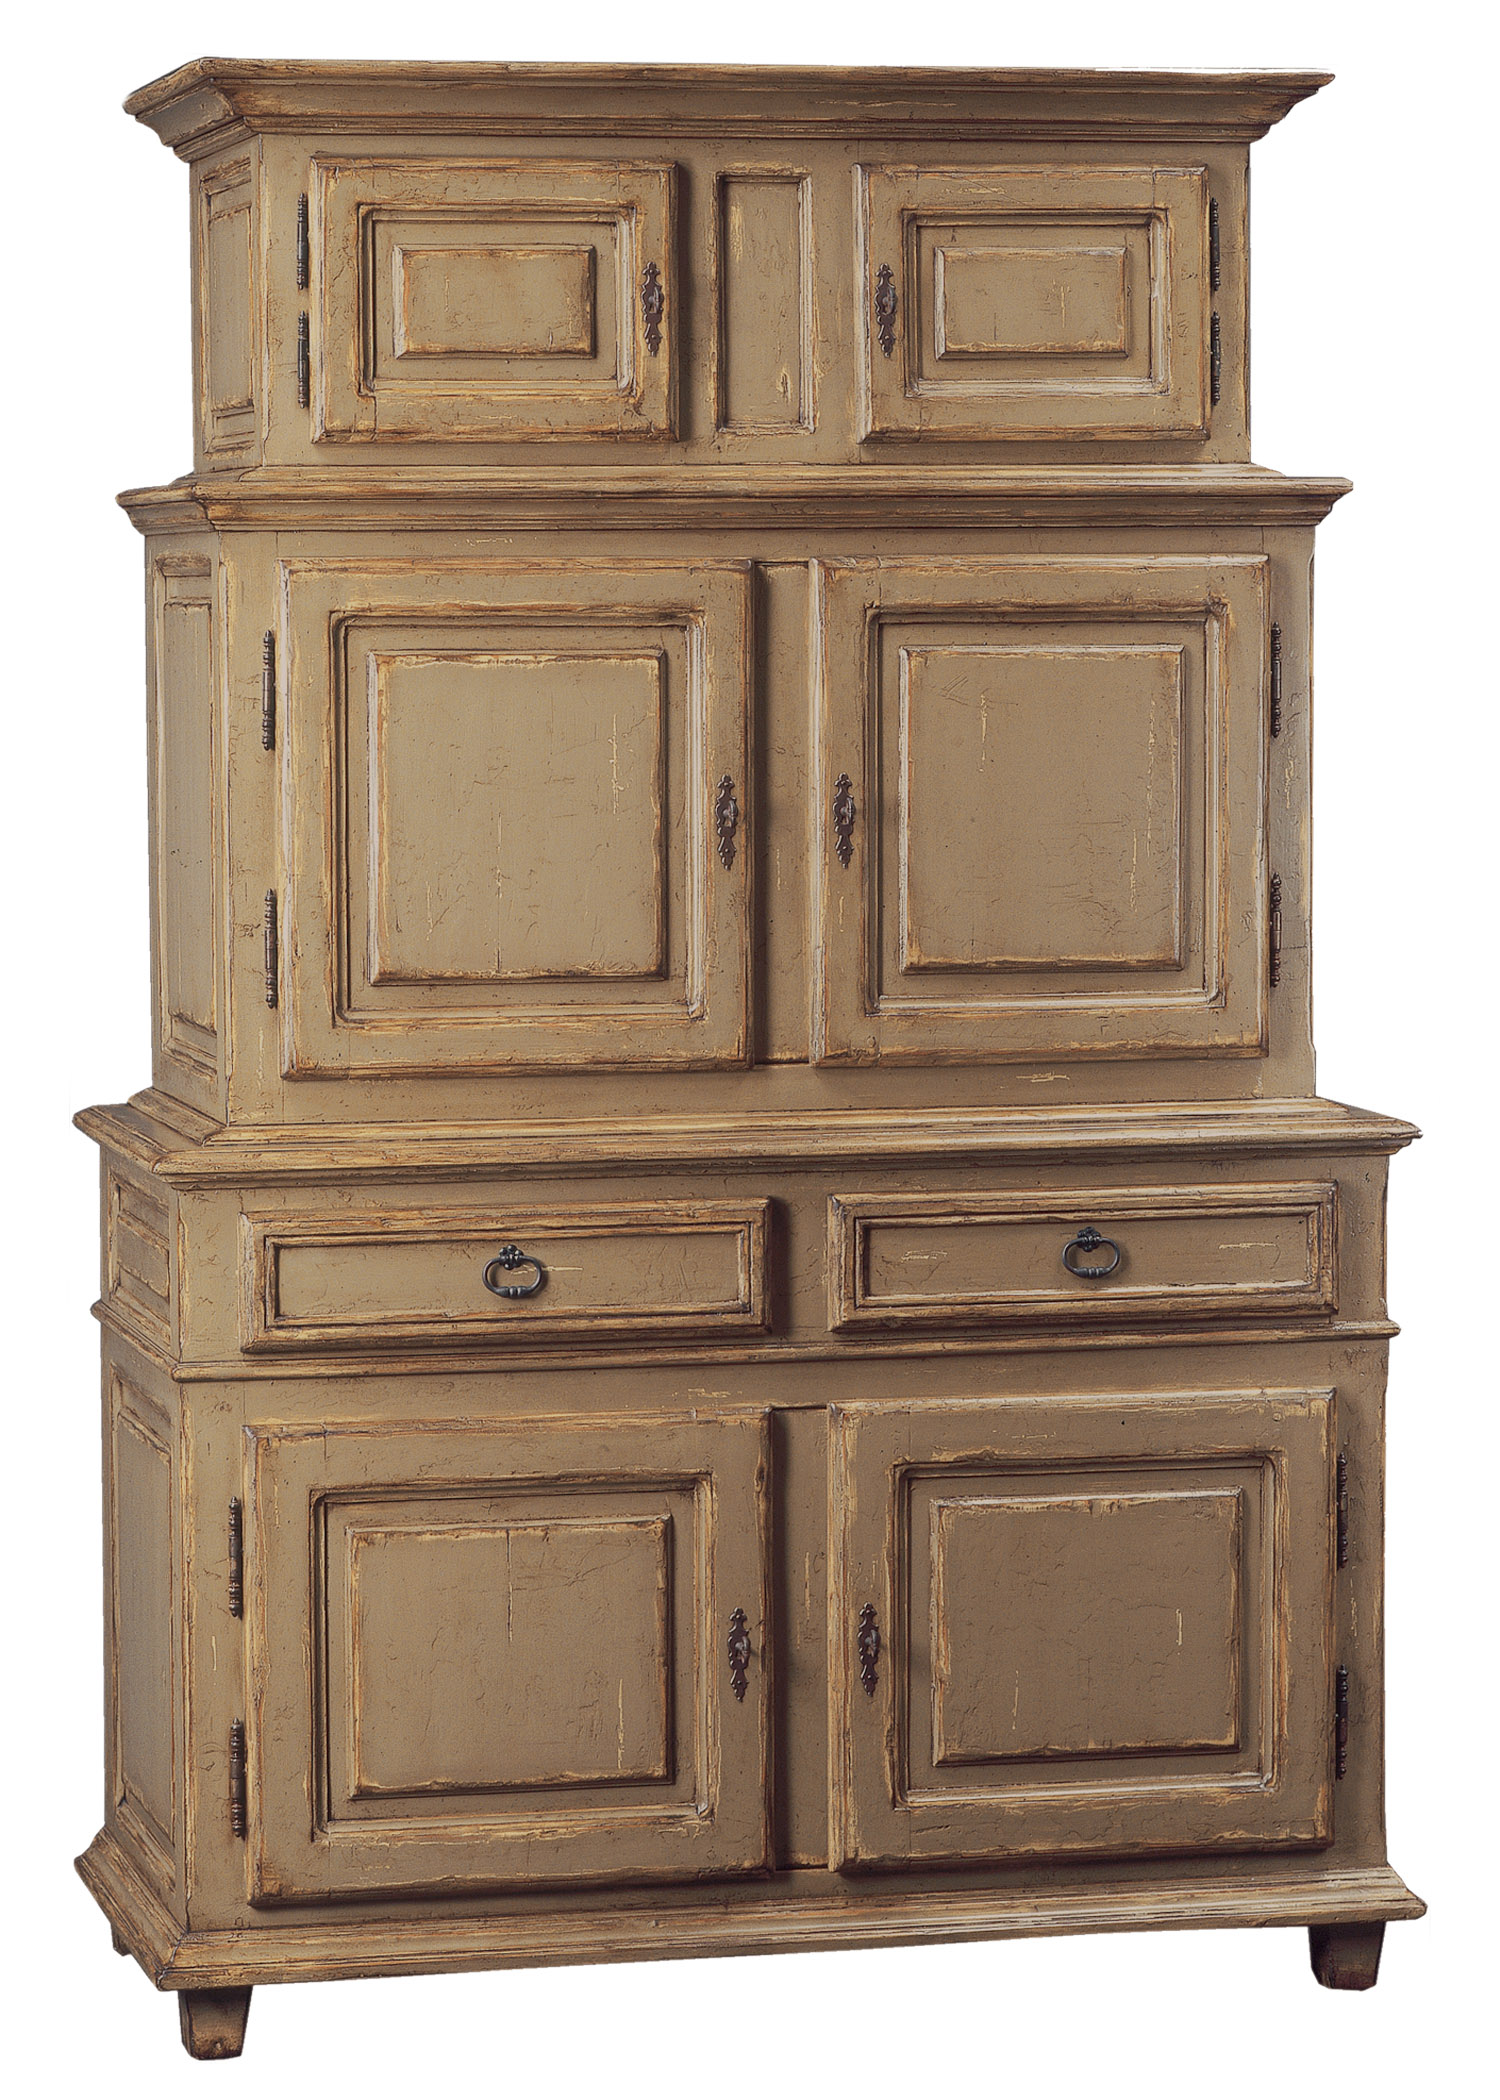 Hildenbrand stacked traditional cabinet with six doors and two drawers in a distressed painted finish by Woodland furniture in Idaho Falls